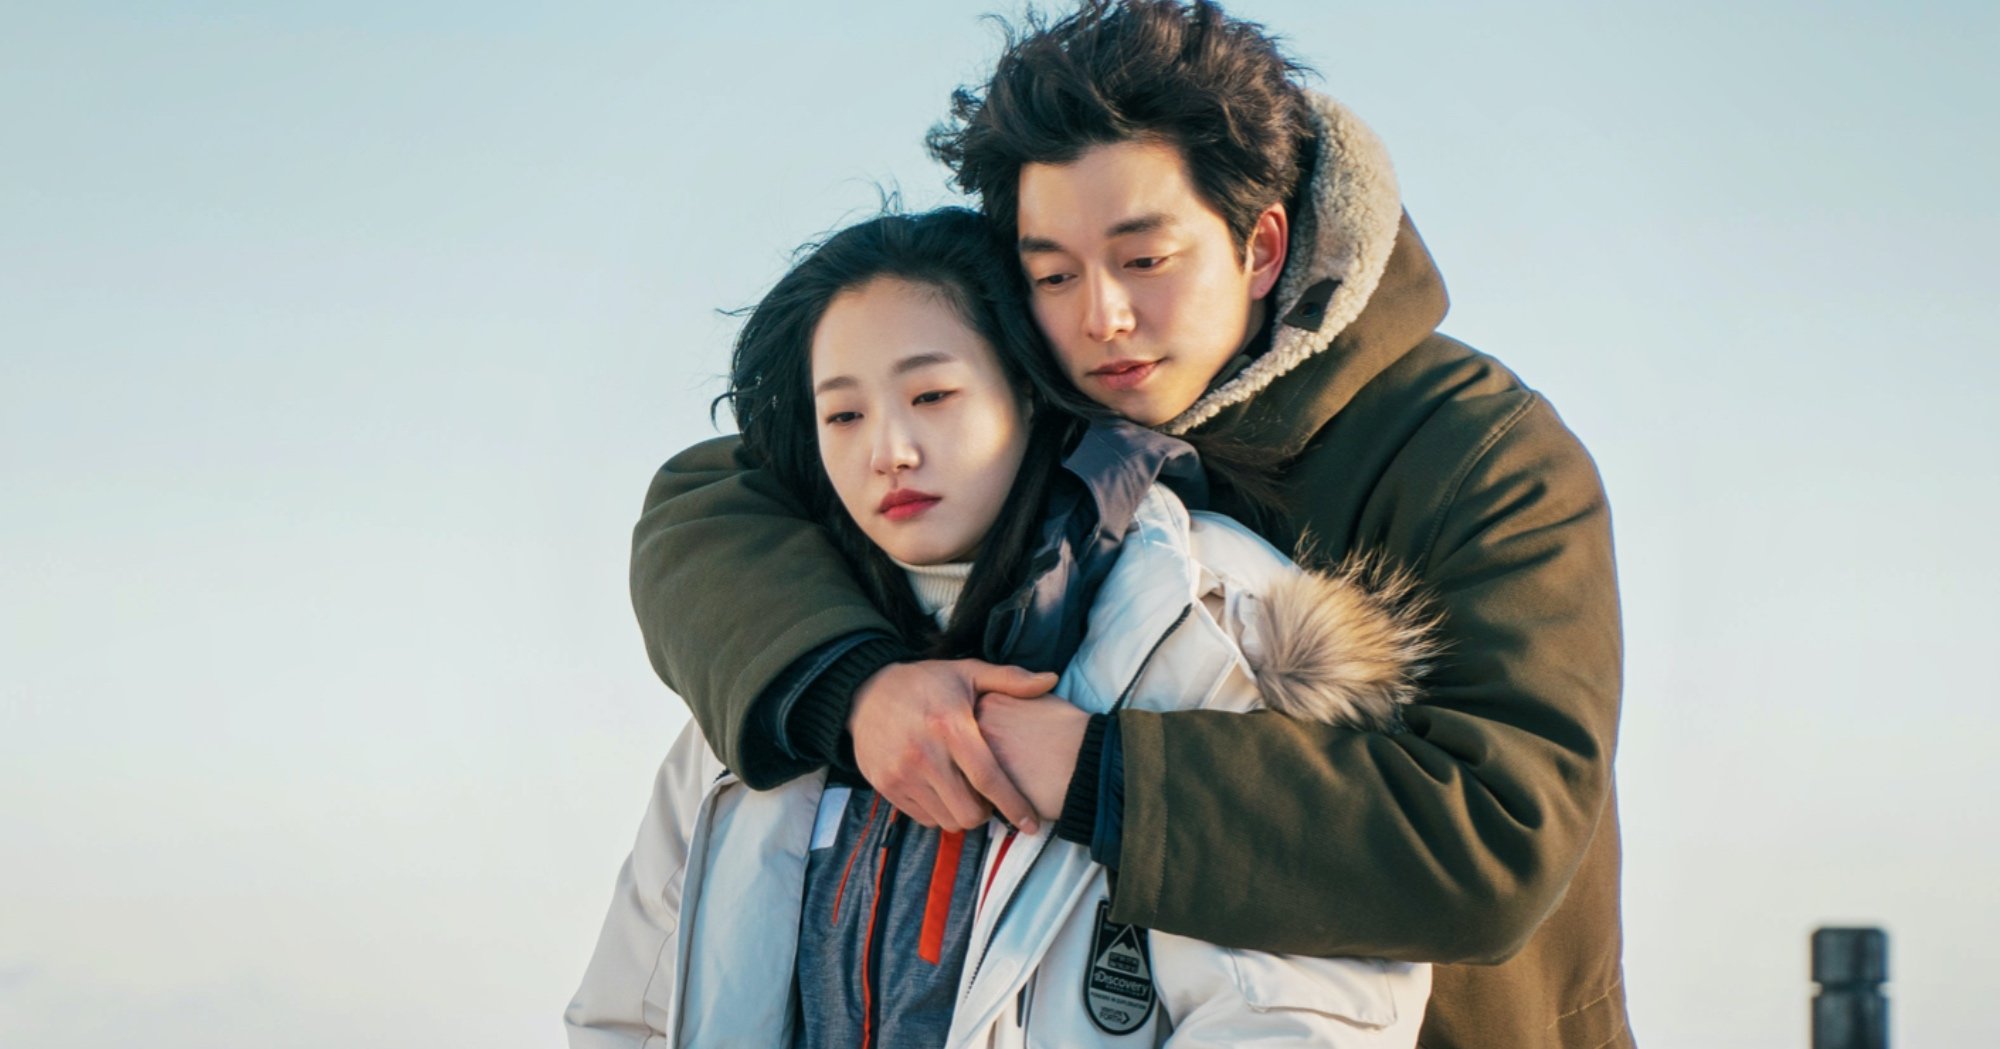 Characters Eun-tak and Kim Shin from 'Guardian the Lonely and Great God' romance K-drama embracing in the cold.